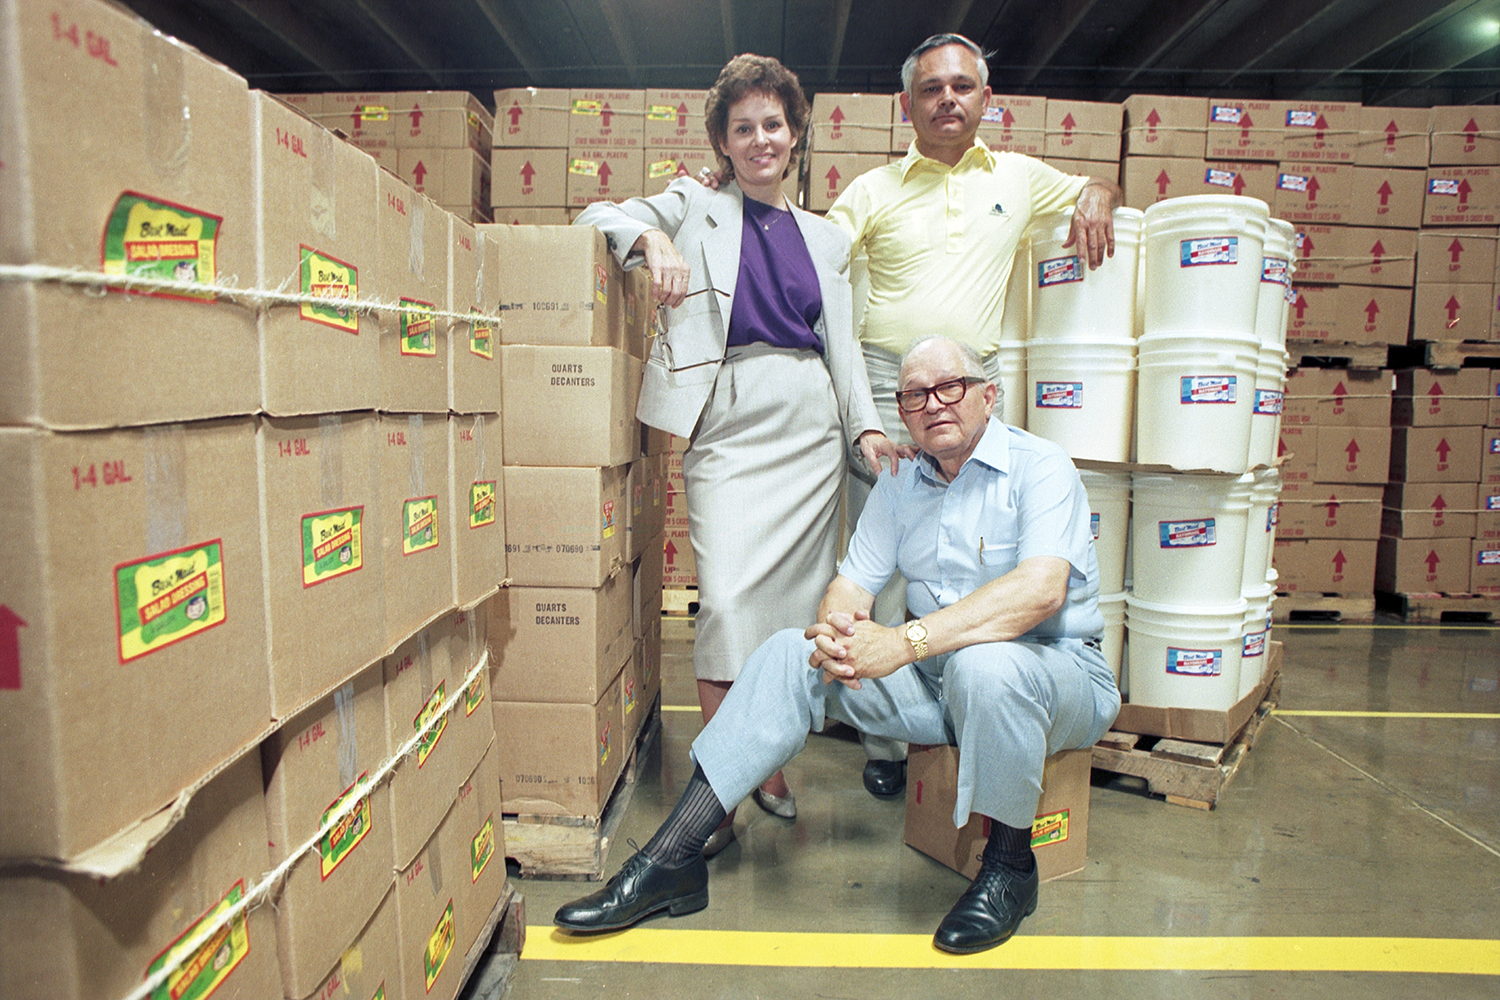 Color photograph of three people pictured in the Best Maid warehouse surrounded by boxes and tubs.